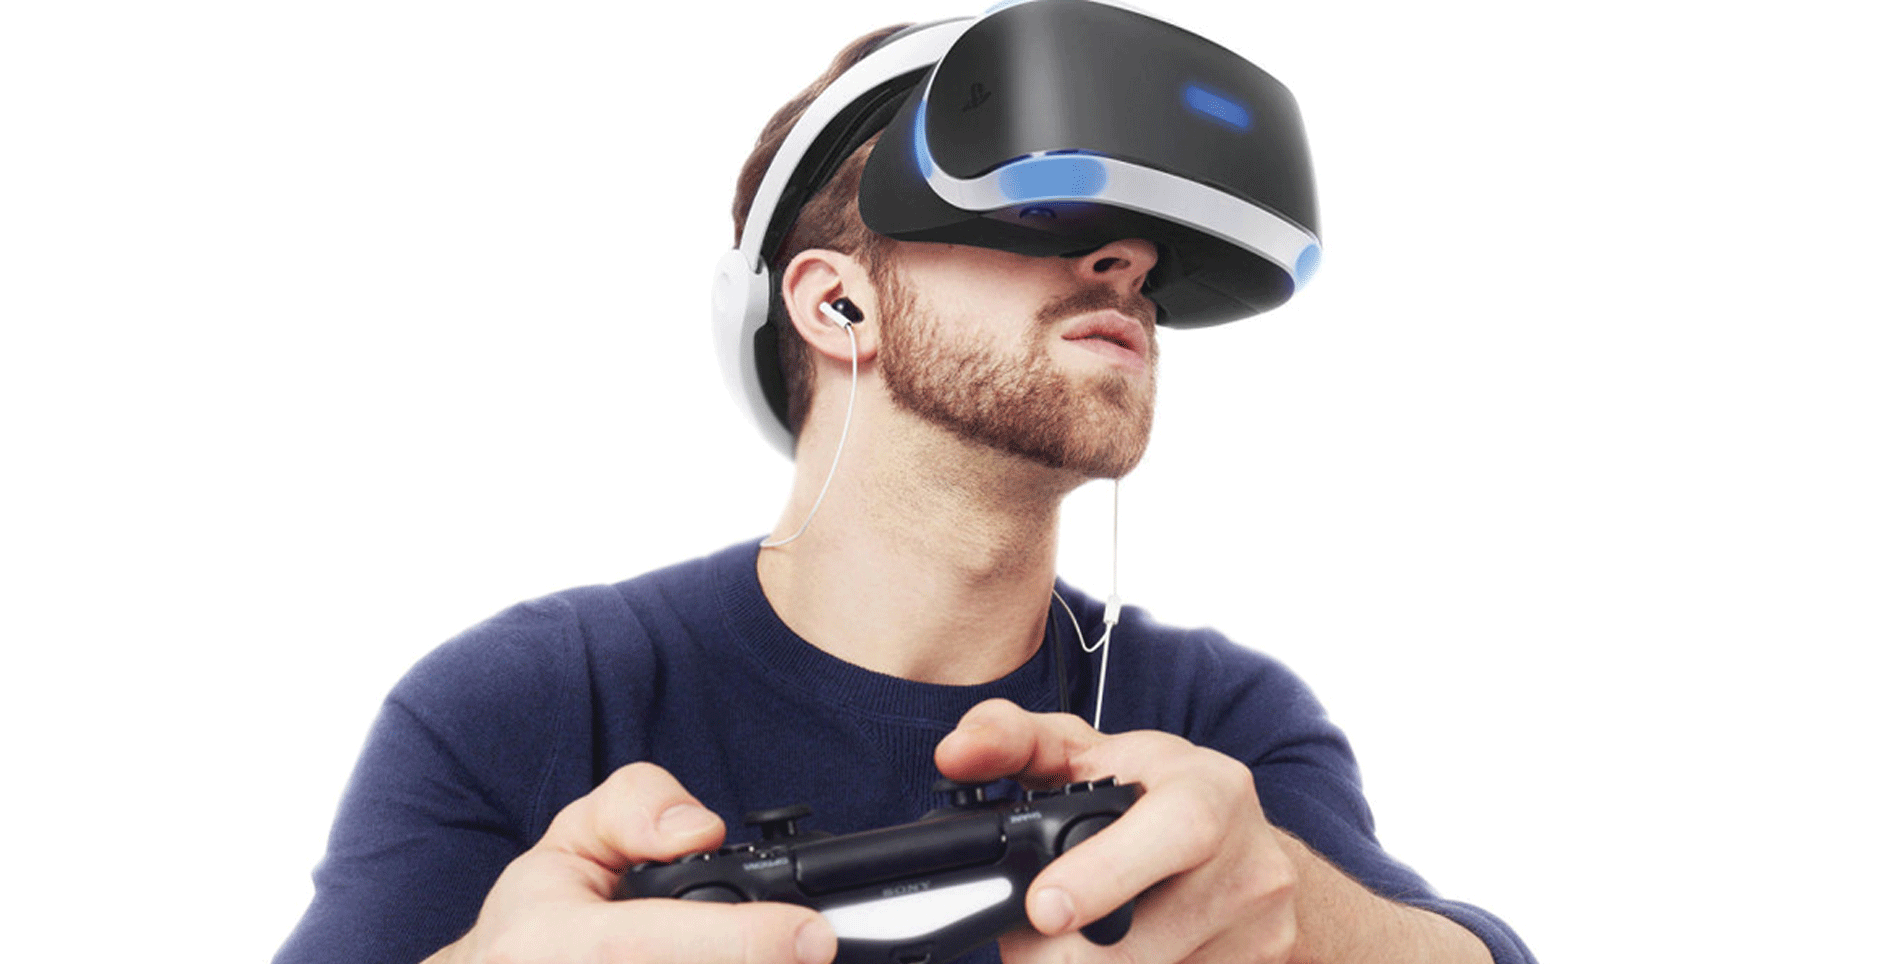 ps4 vr experience games